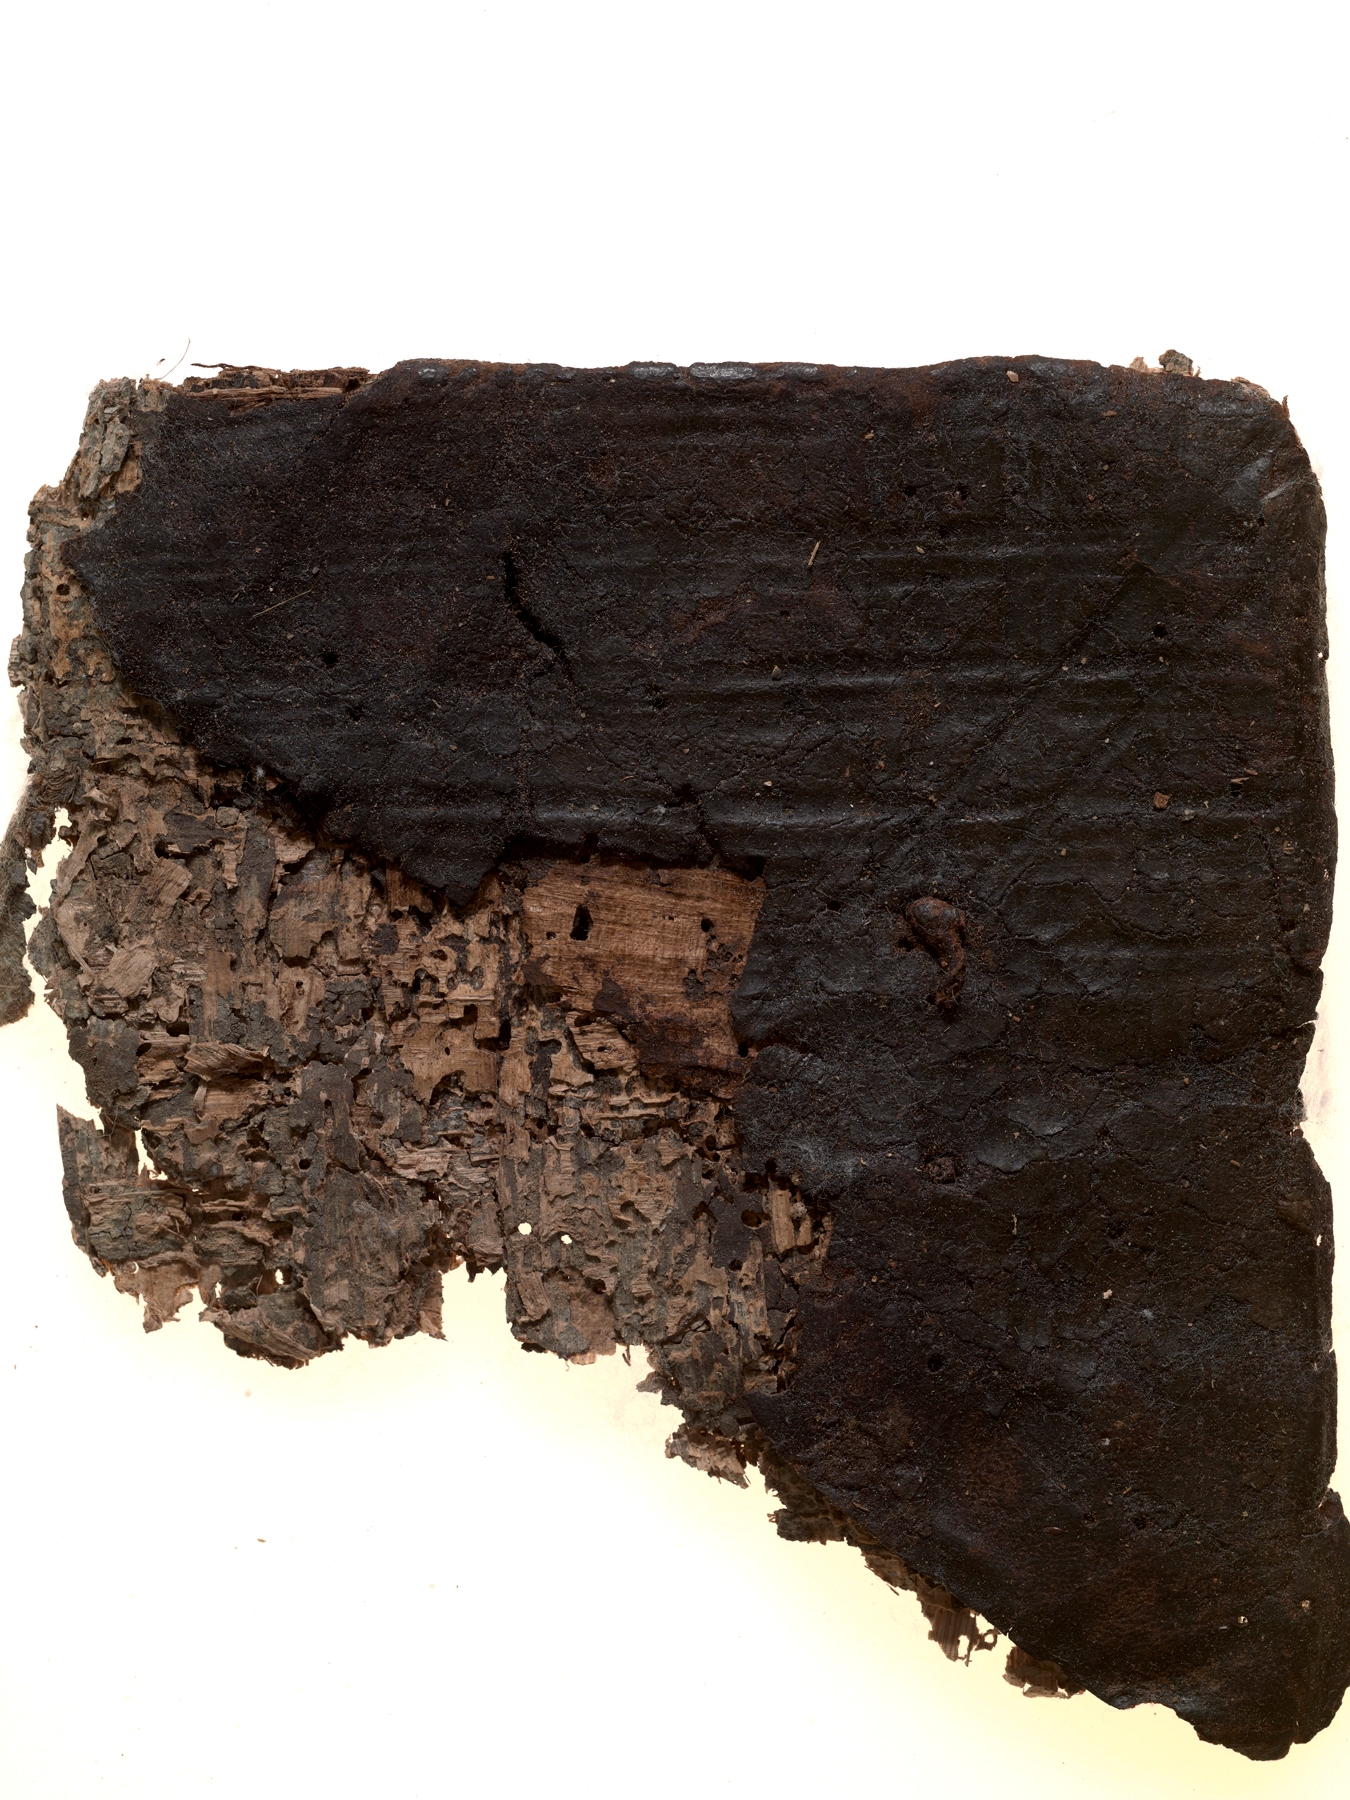 P. Mich. Inv. 7078: A Decorated Leather Fragment